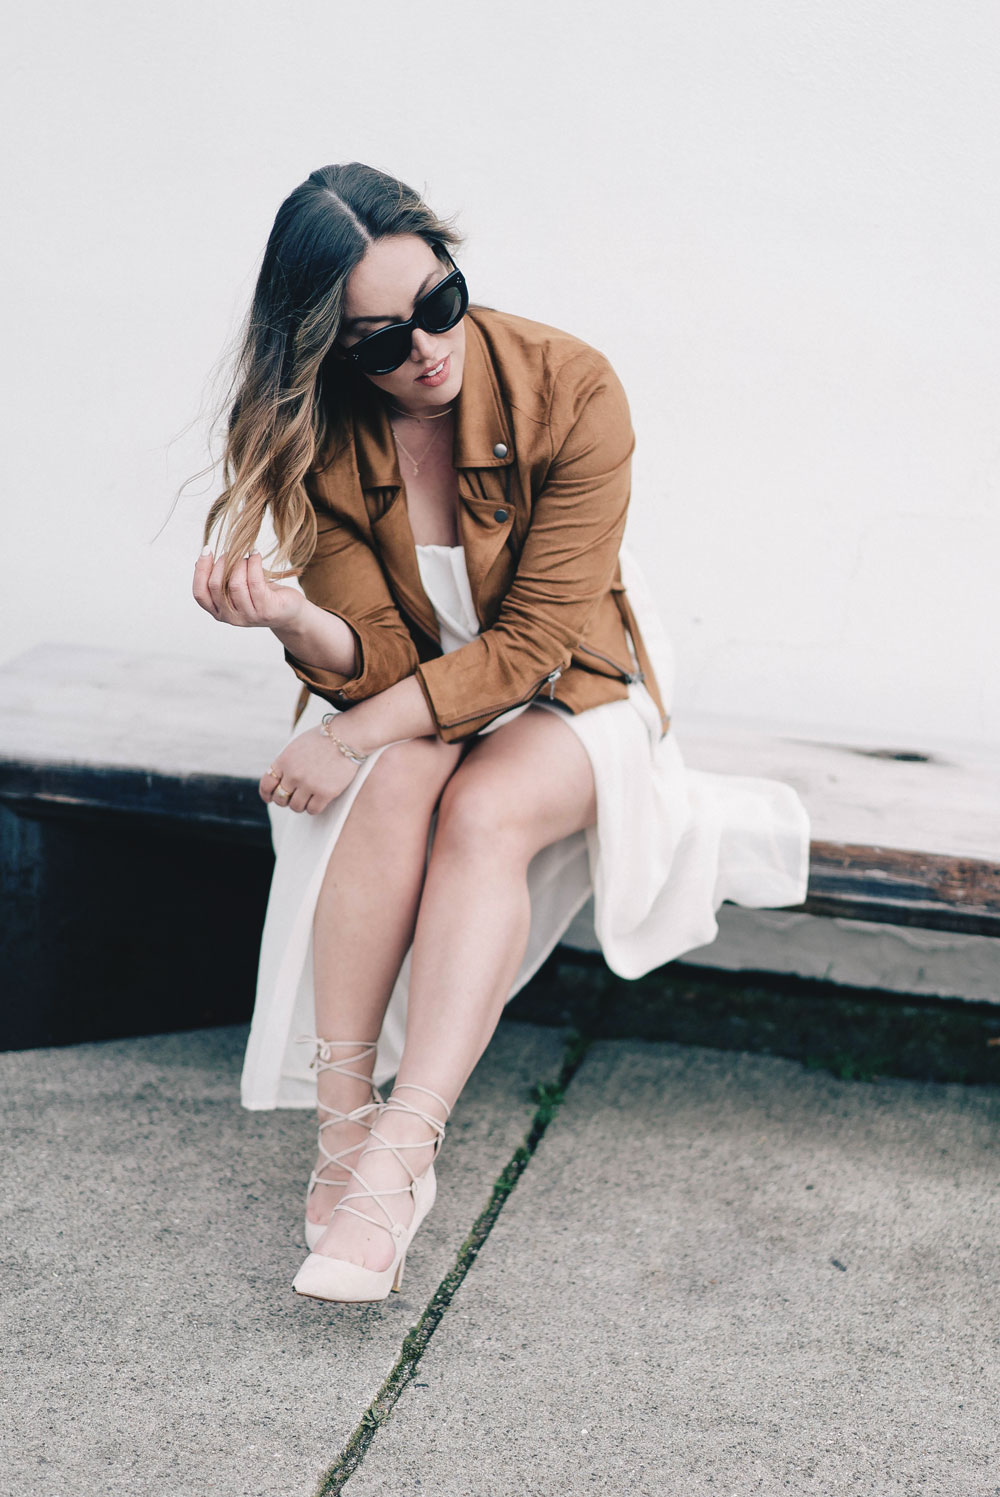 Western trend style tips in Lovers + Friends suede jacket, Revolve clothing, Aritzia skirt, Chicwish cropped top, Raye heels, Bega bag, Leah Alexandra jewelry, Celine sunglasses styled by To Vogue or Bust